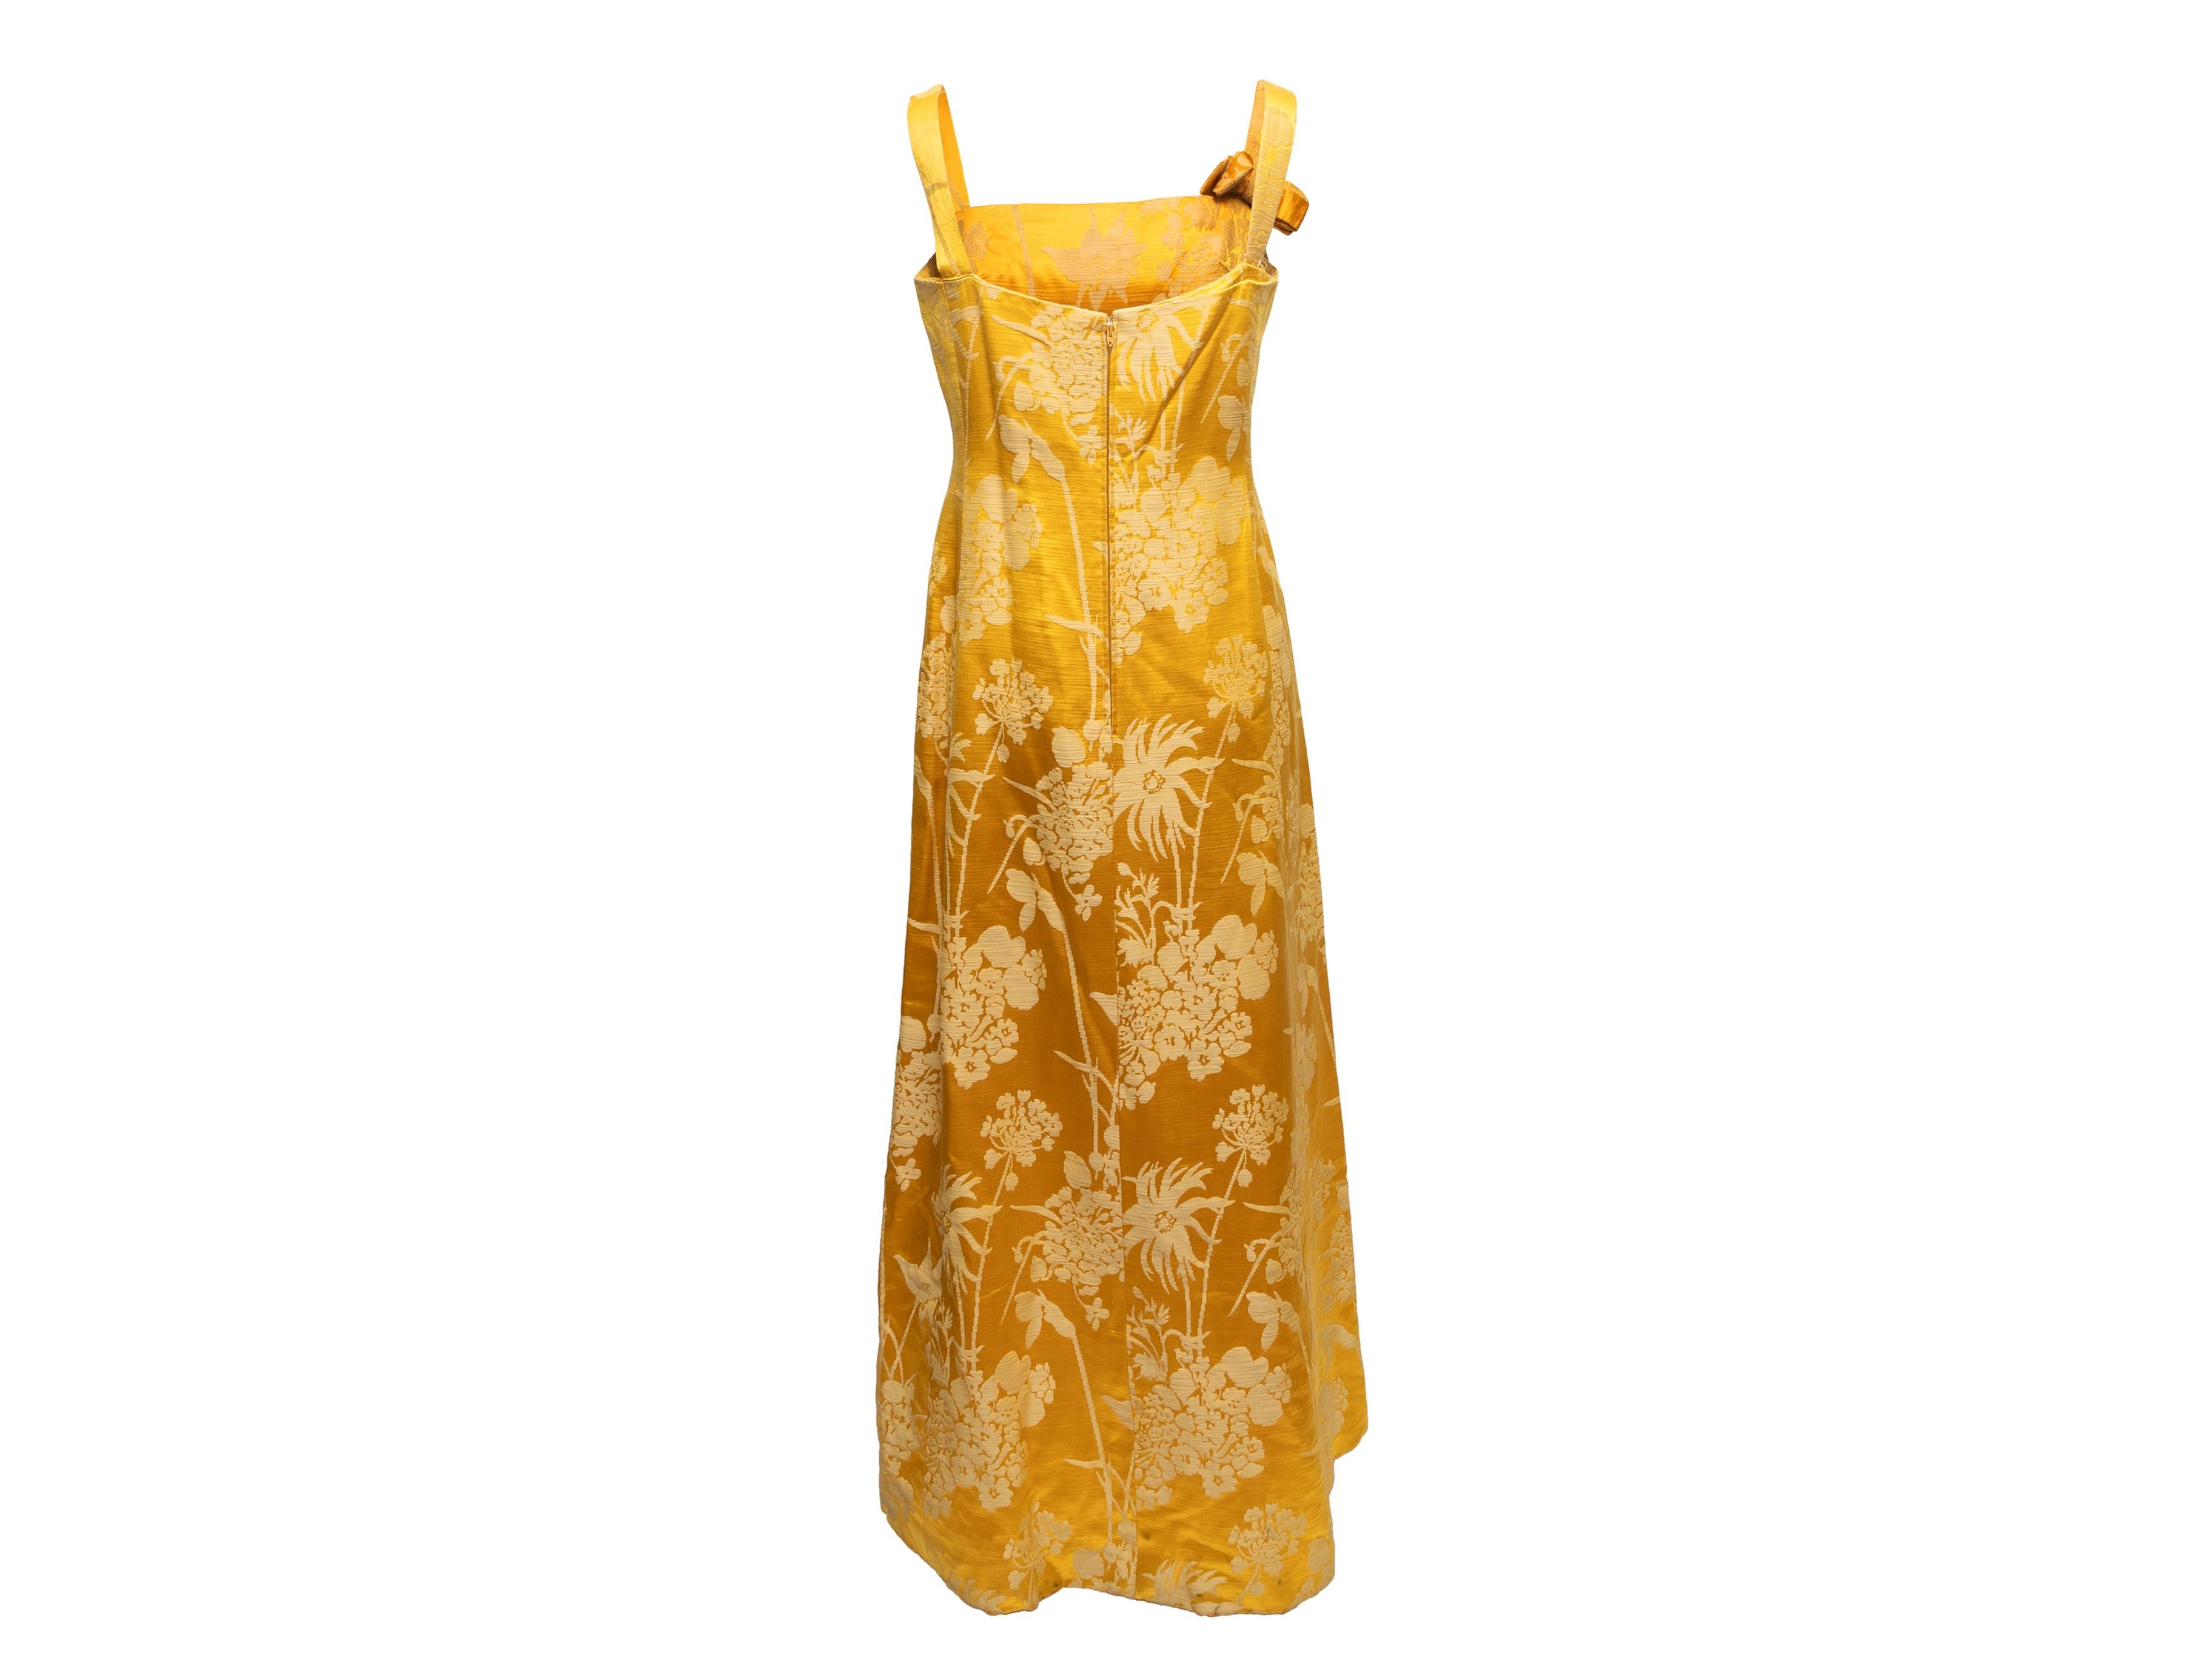 Vintage yellow floral jacquard sleeveless gown by Branell. Square neckline. Narrow straps featuring bow accent. Zip closure at center back. 32